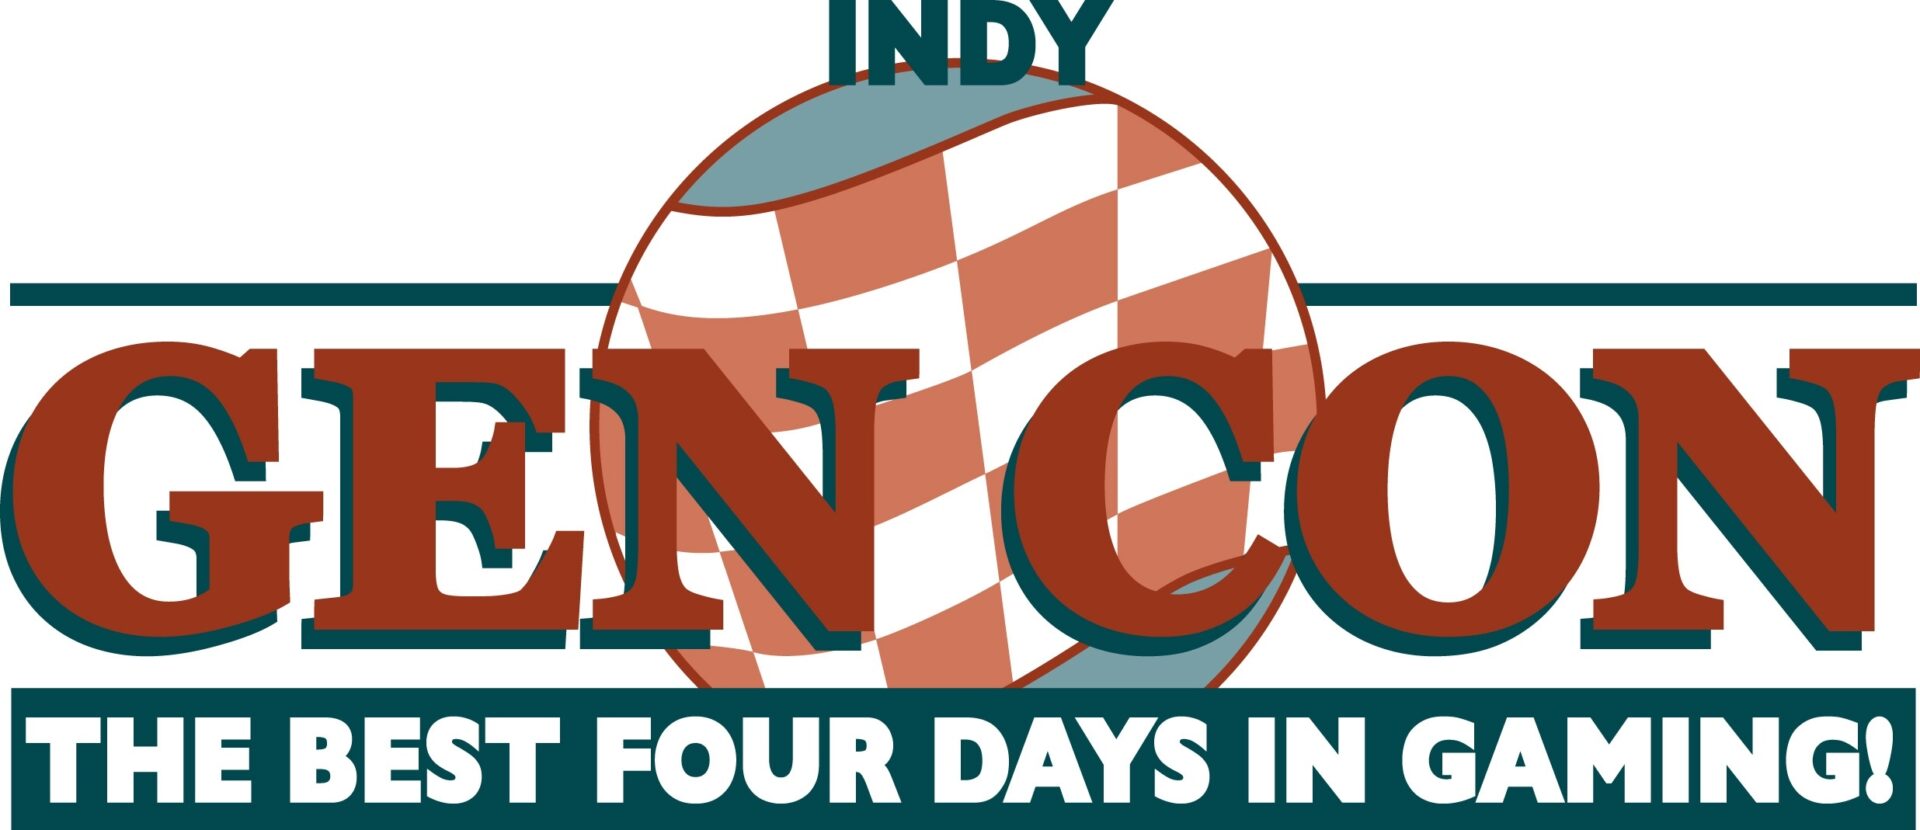 Indy Gen Con! 4 Days of Gaming Fun